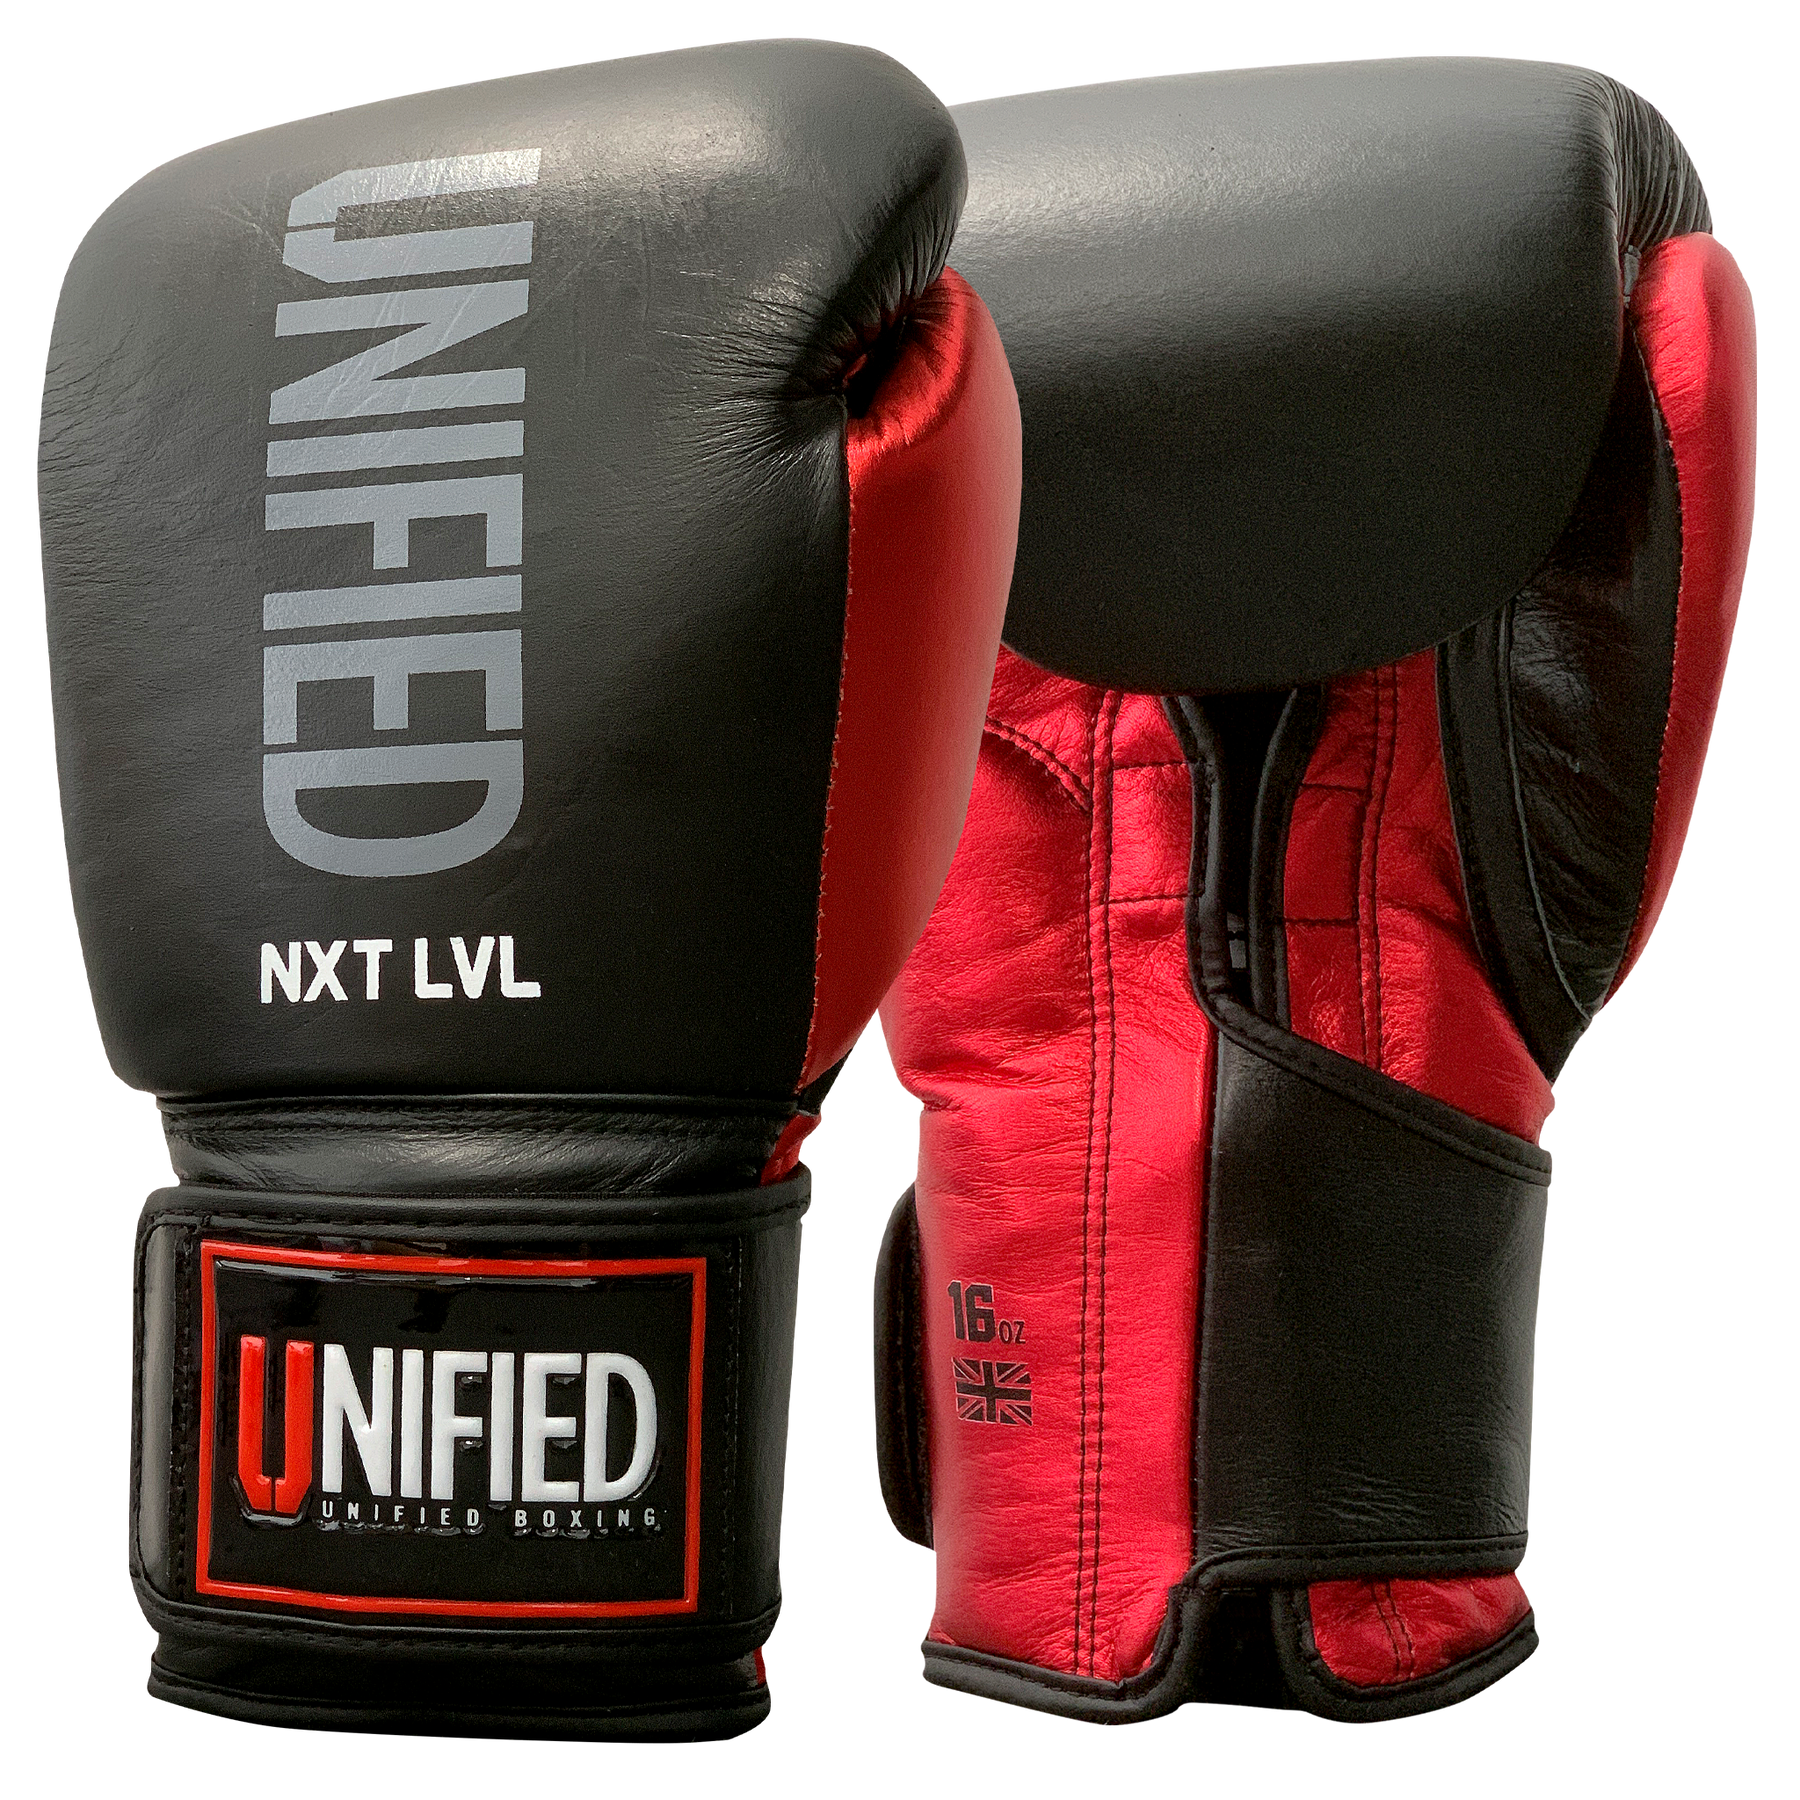 Unified Boxing Gloves Online, SAVE 33%